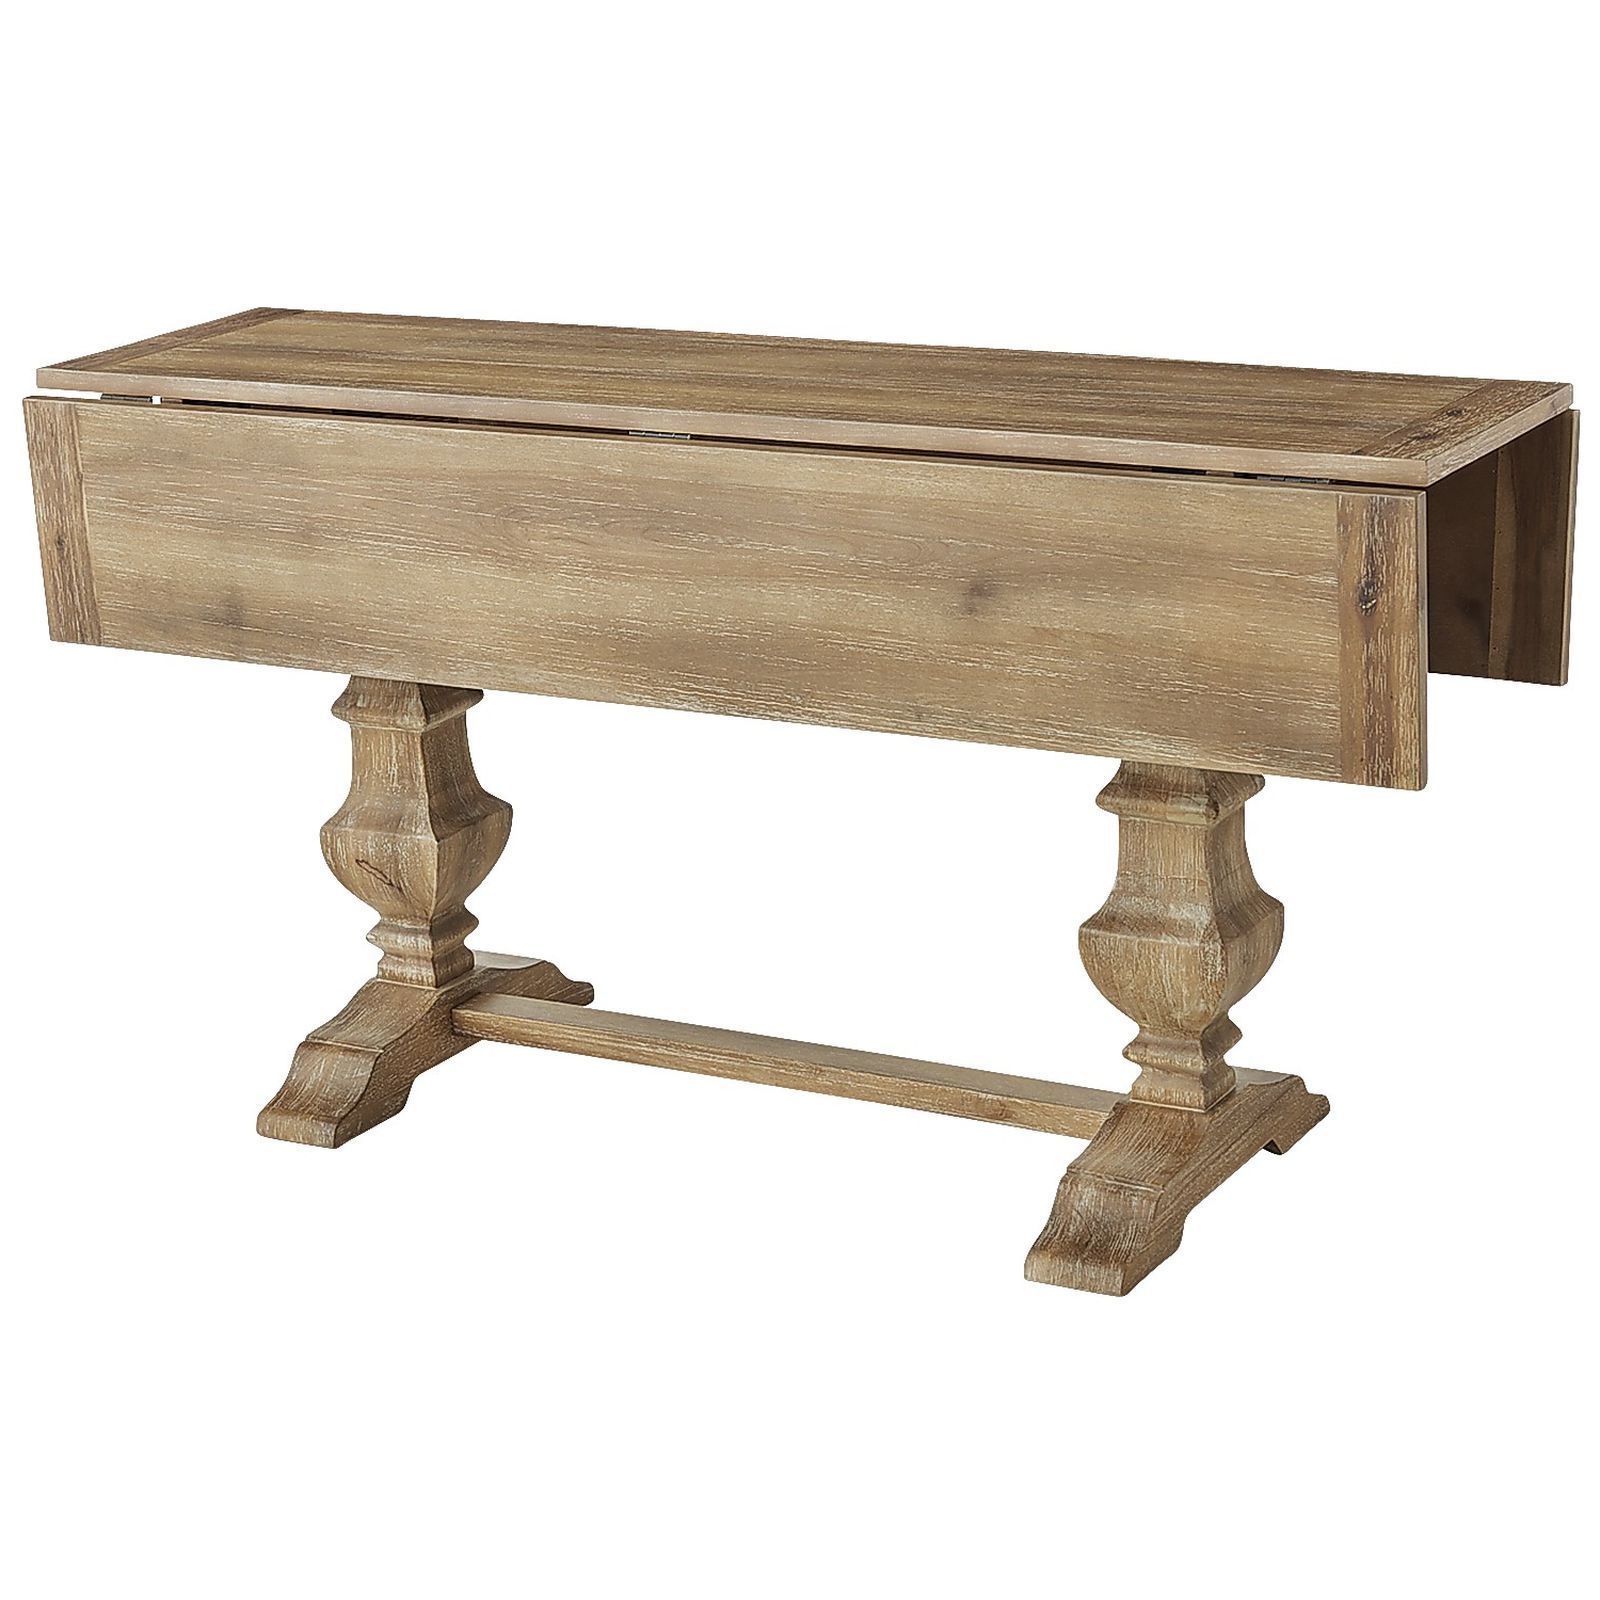 Traditional Meets Subtle Rustic For Casual Or Formal Within Trendy Adams Drop Leaf Trestle Dining Tables (View 10 of 20)